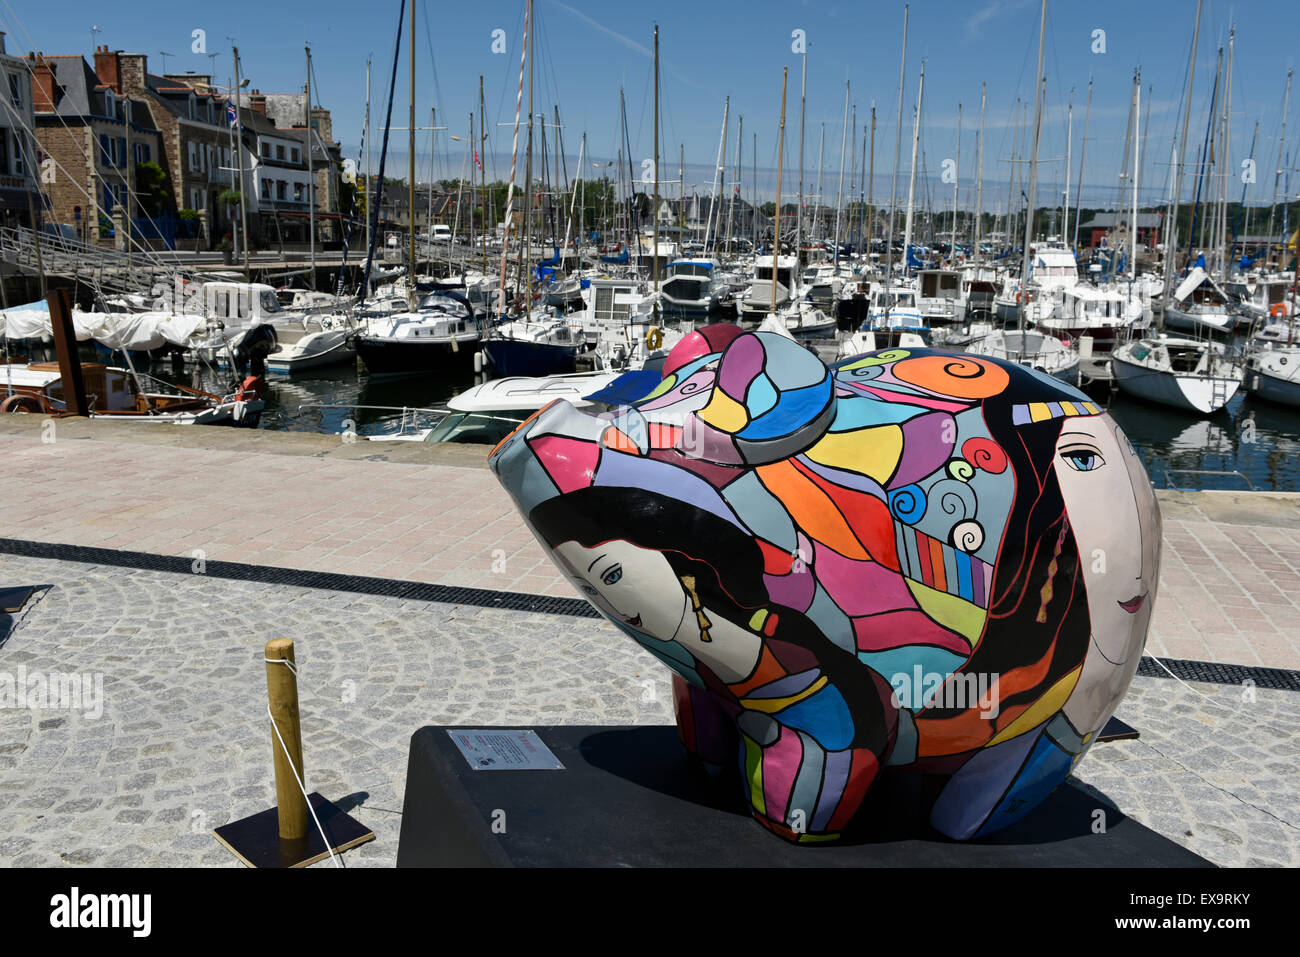 Pig Parade at Paimpol Harbour, Paimpol, Côtes-d'Armor, Brittany, France.  15 decorated pig sculptures by different artists. Stock Photo